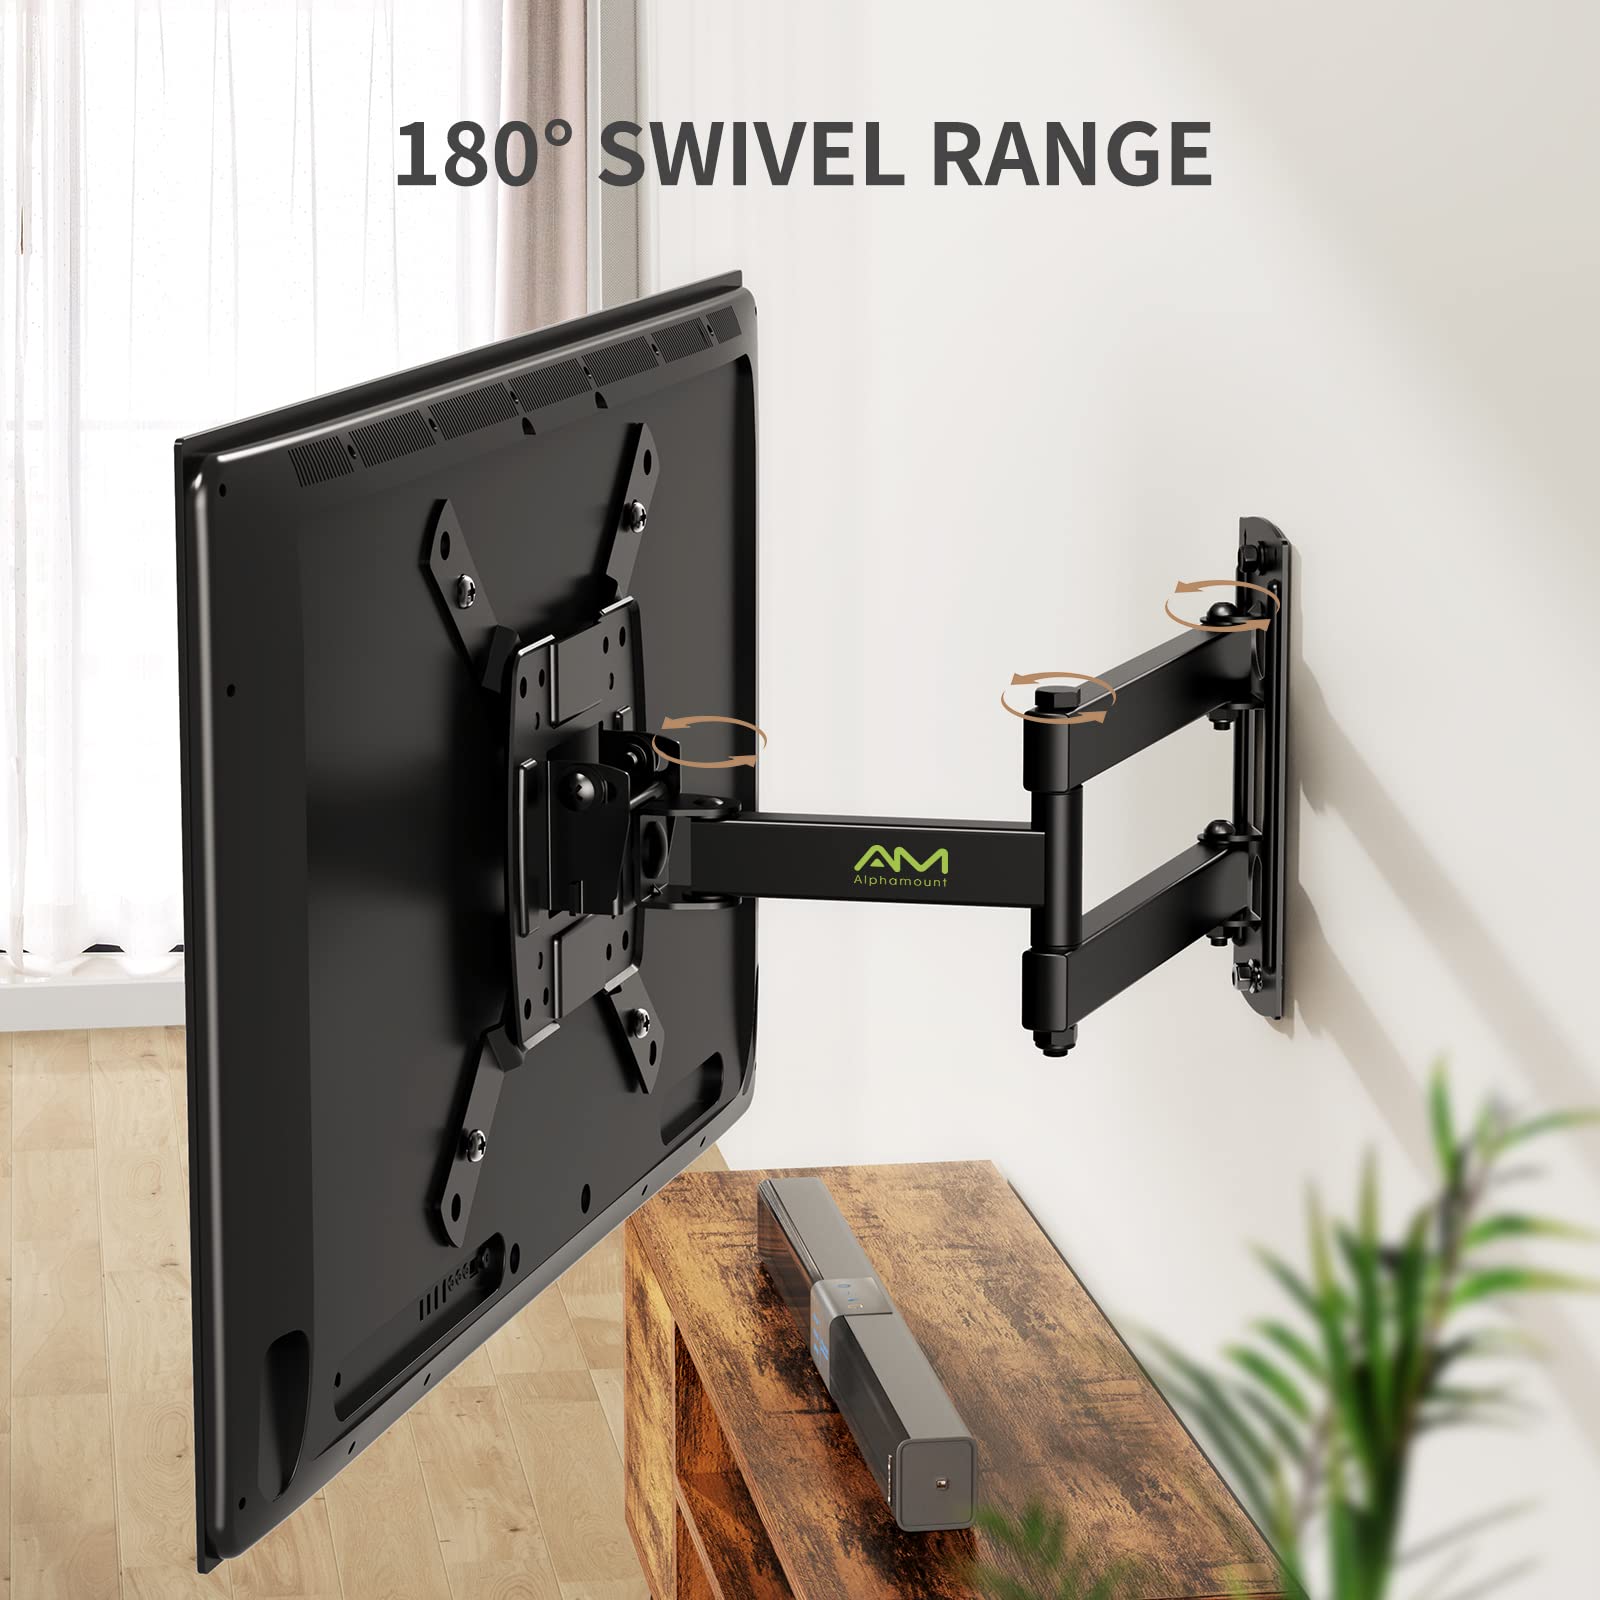 AM alphamount TV Wall Mount Bracket Full Motion for Most 13-39 inch TVs Monitors with 360° Rotation Articulating Swivel Extension Arms and Tilt, Hold TV up to 44lbs Max VESA 200x200mm